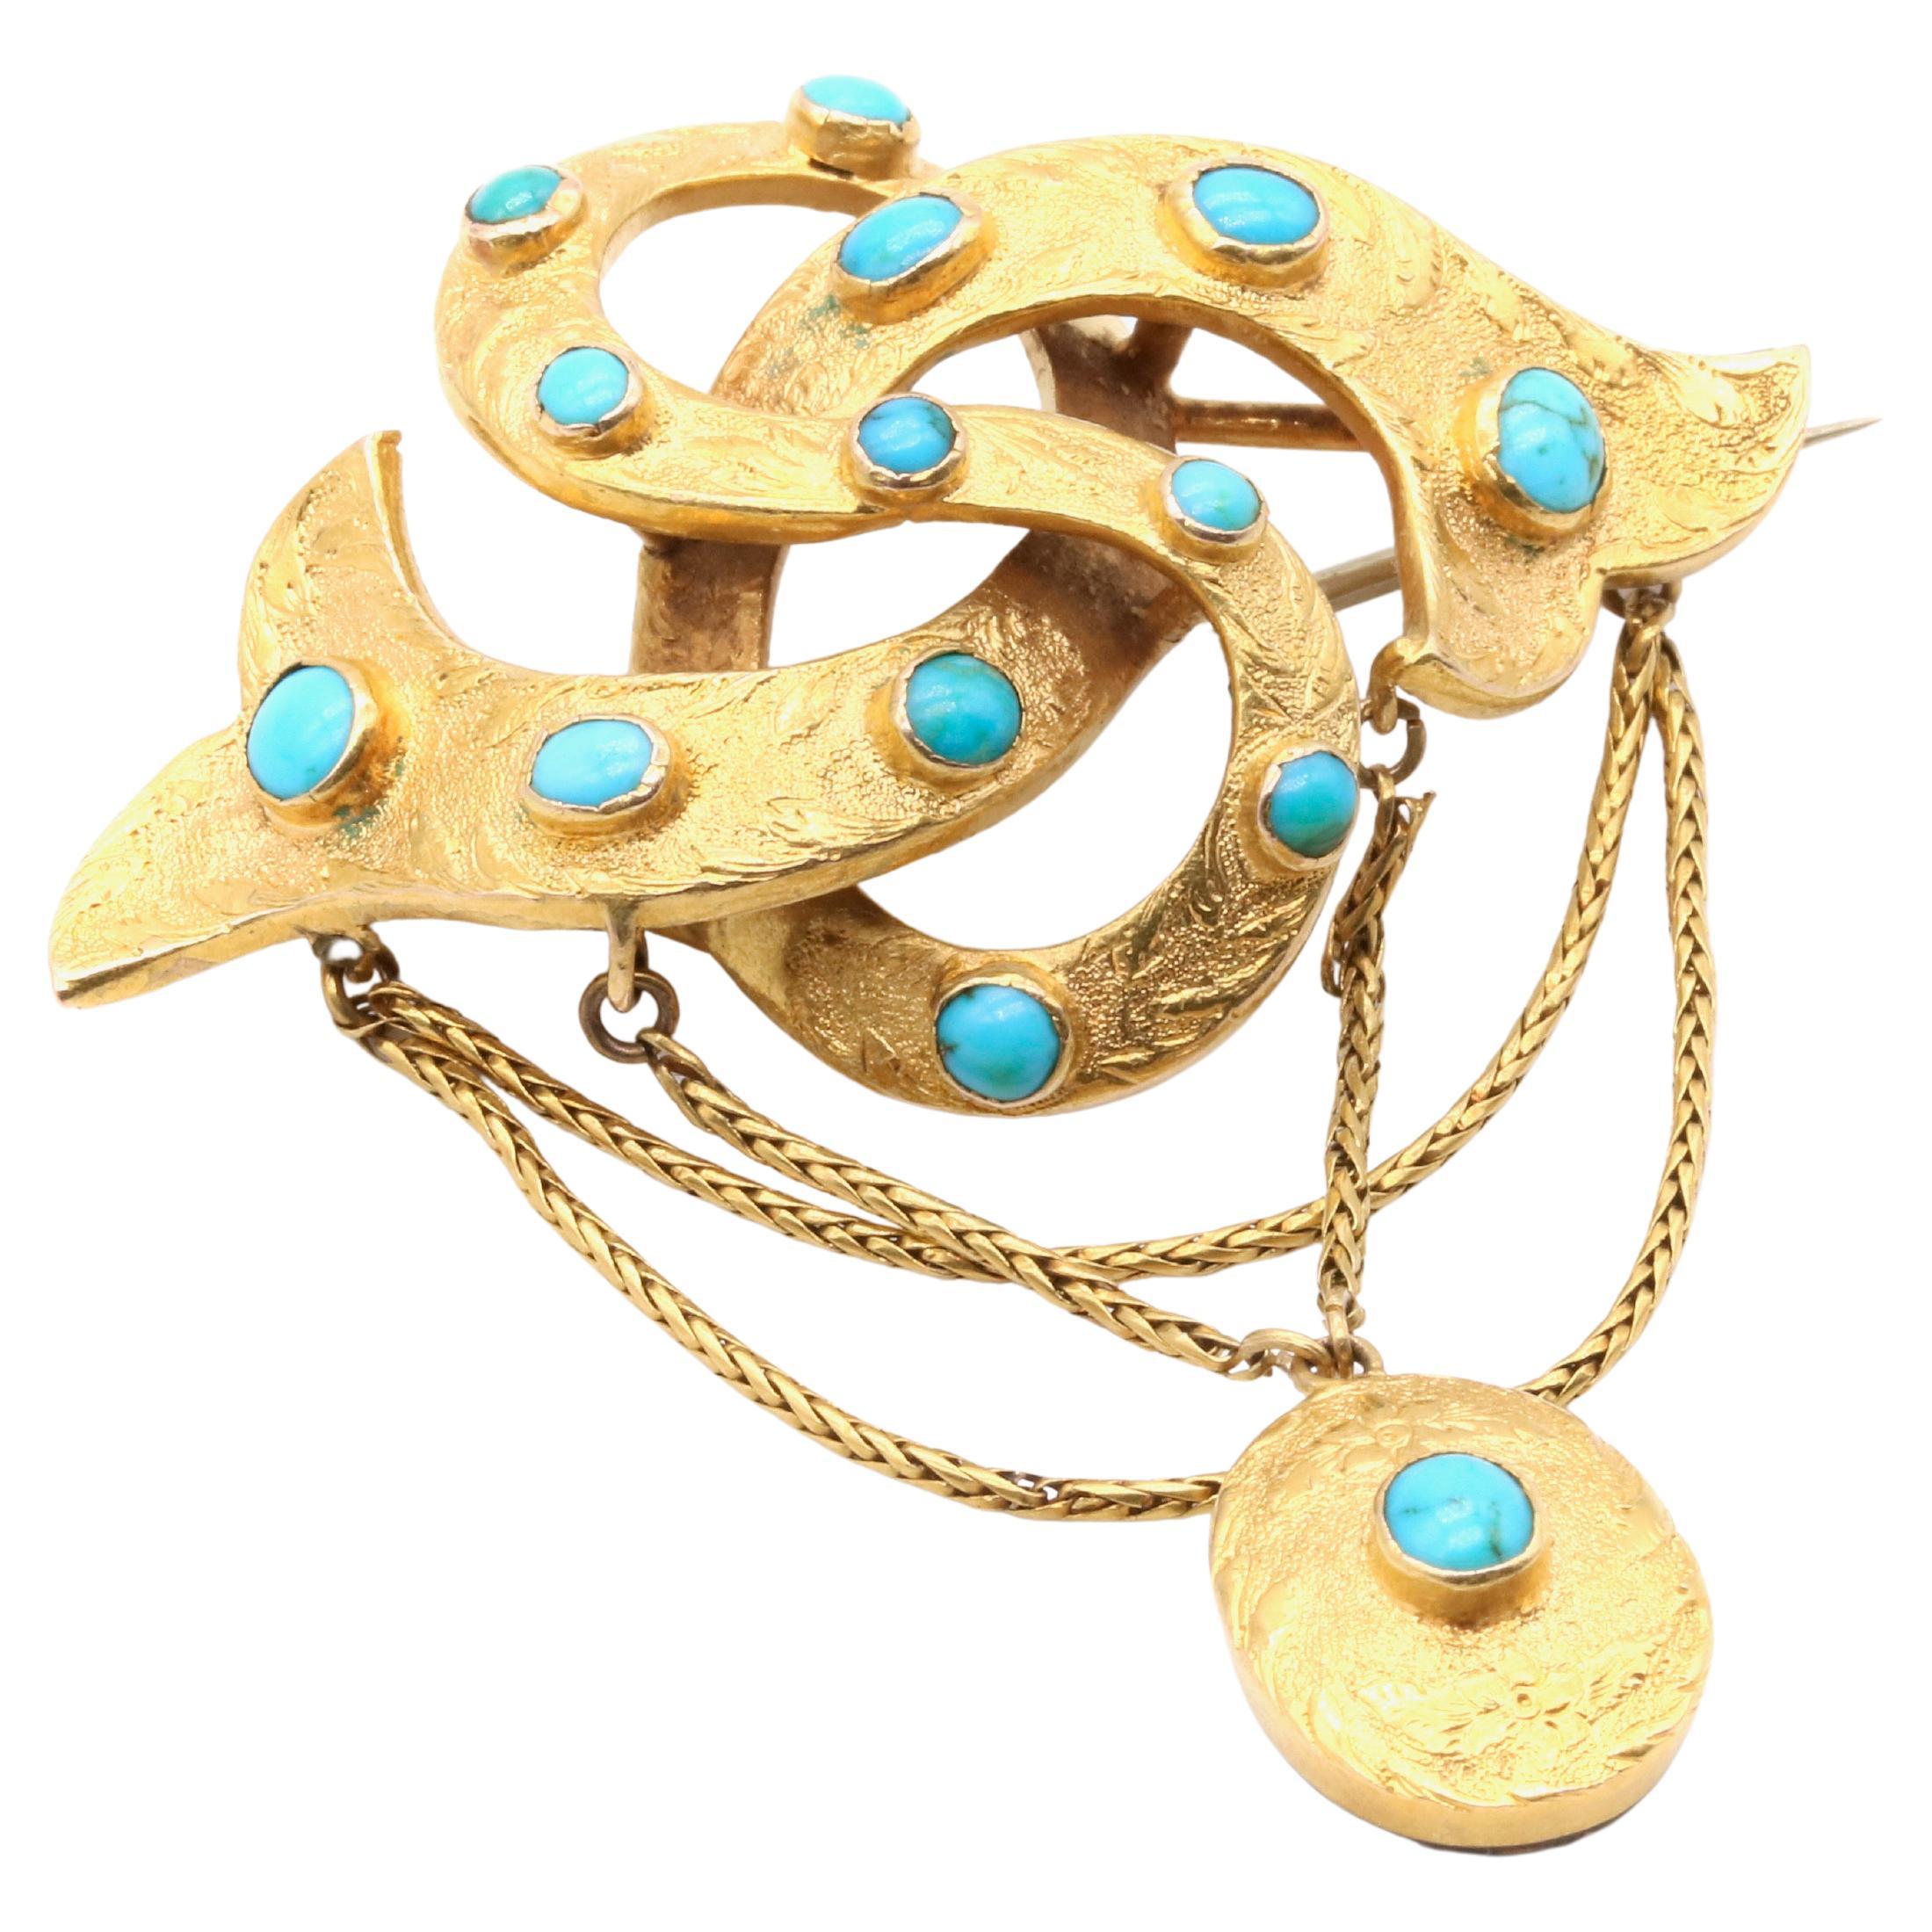 Antique Victorian 15K Yellow Gold Turquoise Lovers Knot Memorial Locket Brooch